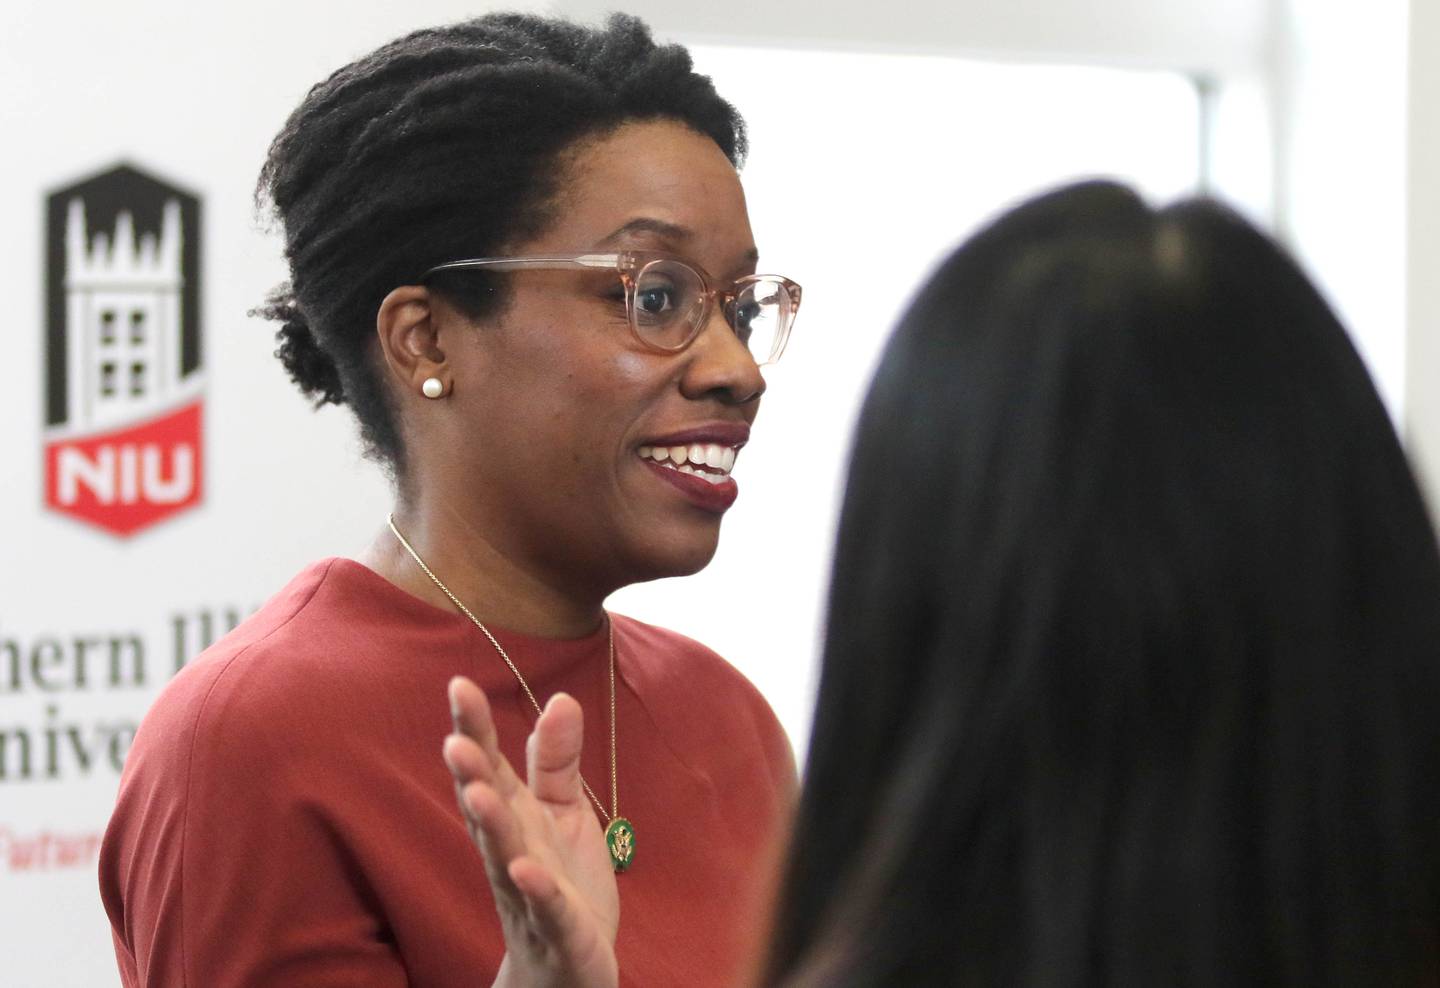 U.S. Rep. Lauren Underwood, D-Naperville, talks to students after she toured the semi-conductor lab Friday, Jan. 20, 2023, at the Northern Illinois University College of Engineering and Engineering Technology building in DeKalb. Underwood was visiting NIU to celebrate the university receiving $1.5 million in federal funding to upgrade its microchips manufacturing lab.